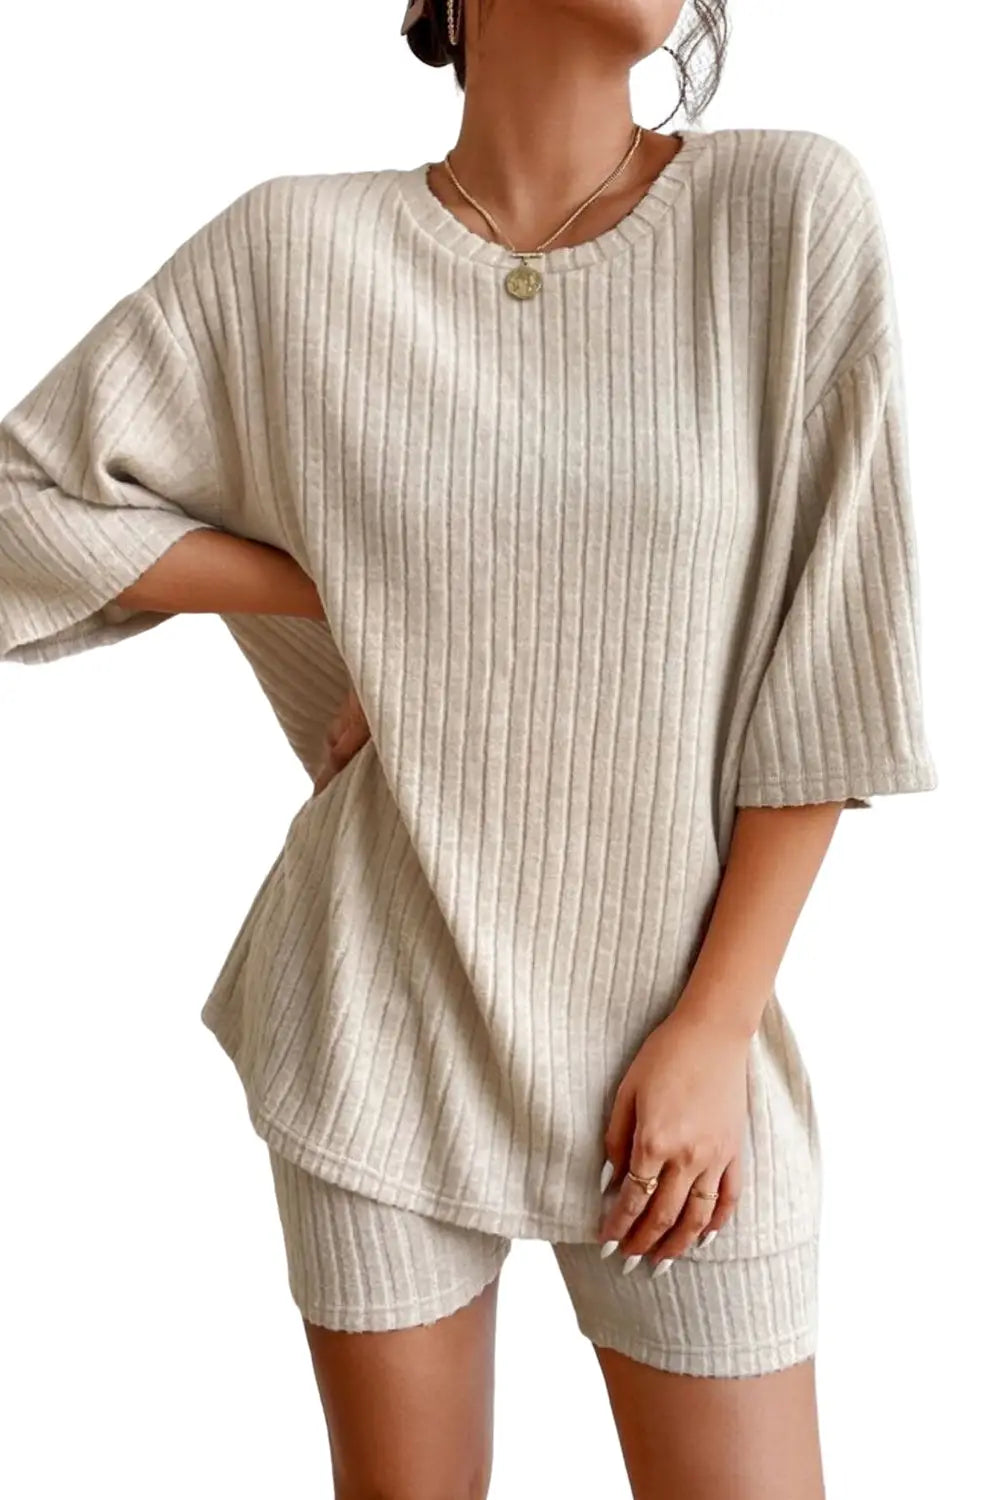 Apricot plain ribbed loose fit two piece lounge set